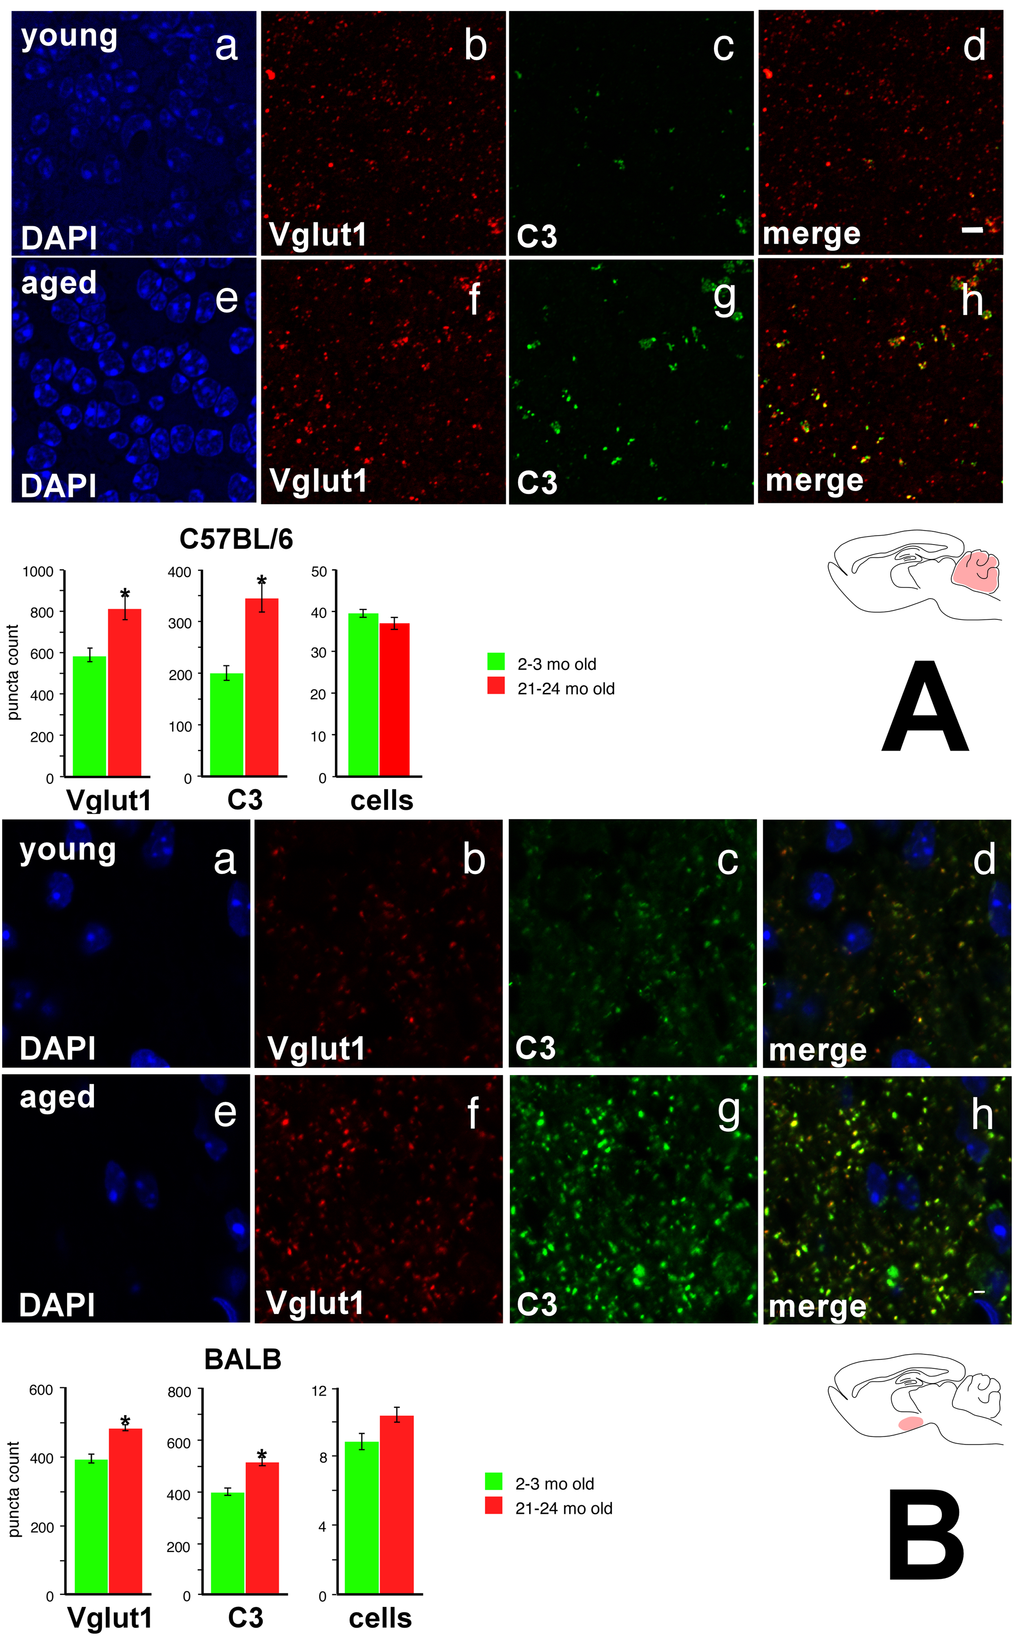 Vglut1 and C3 show increased expression in the cerebellar internal granule cell layer of the aged C57BL/6 mouse and in the hypothalamic arcuate nucleus of the aged BALB mouse. (A) C57BL/6 cerebellar internal granule cell layer. a DAPI stain, young. b Vglut1 immunoreactivity, young. c. C3 immunoreactivity, young. d Merge, young. Note significant colocalization of Vglut1 and C3 staining, particularly for more intense puncta. e DAPI, aged. f Vglut1, aged. g C3, aged. h Merge, aged. Bottom: Quantification of Vglut1, C3, and DAPI. (B) BALB hypothalamic arcuate nucleus. Panels a-h as above. Again, note significant colocalization of Vglut1 and C3 staining, particularly for more intense puncta. Asterisk denotes p